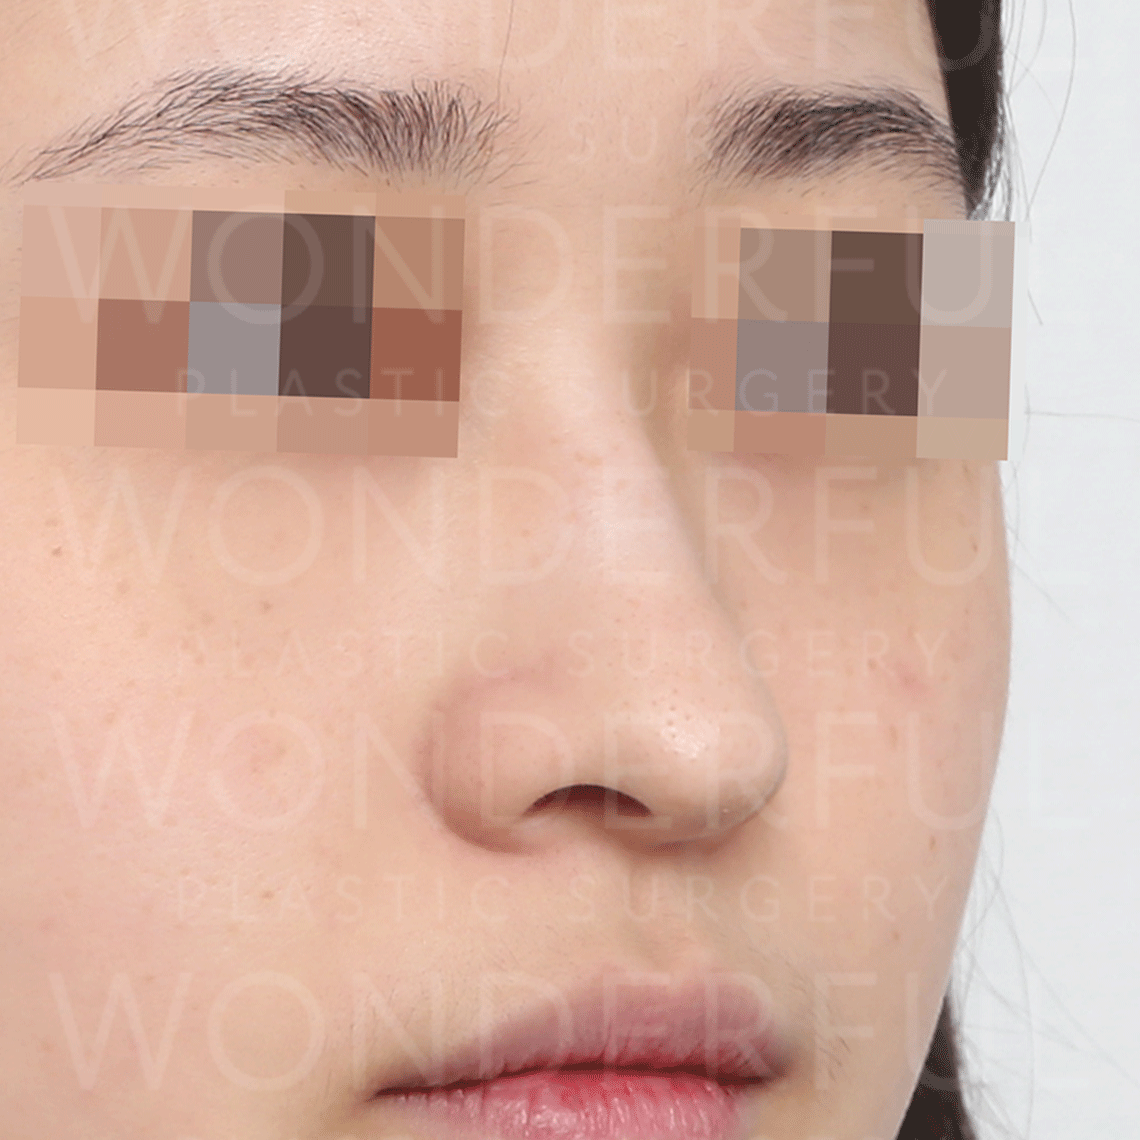 wonderful-plastic-surgery-hospital-korea-arrow-nose-rhinoplasty-before-after-results-before-1